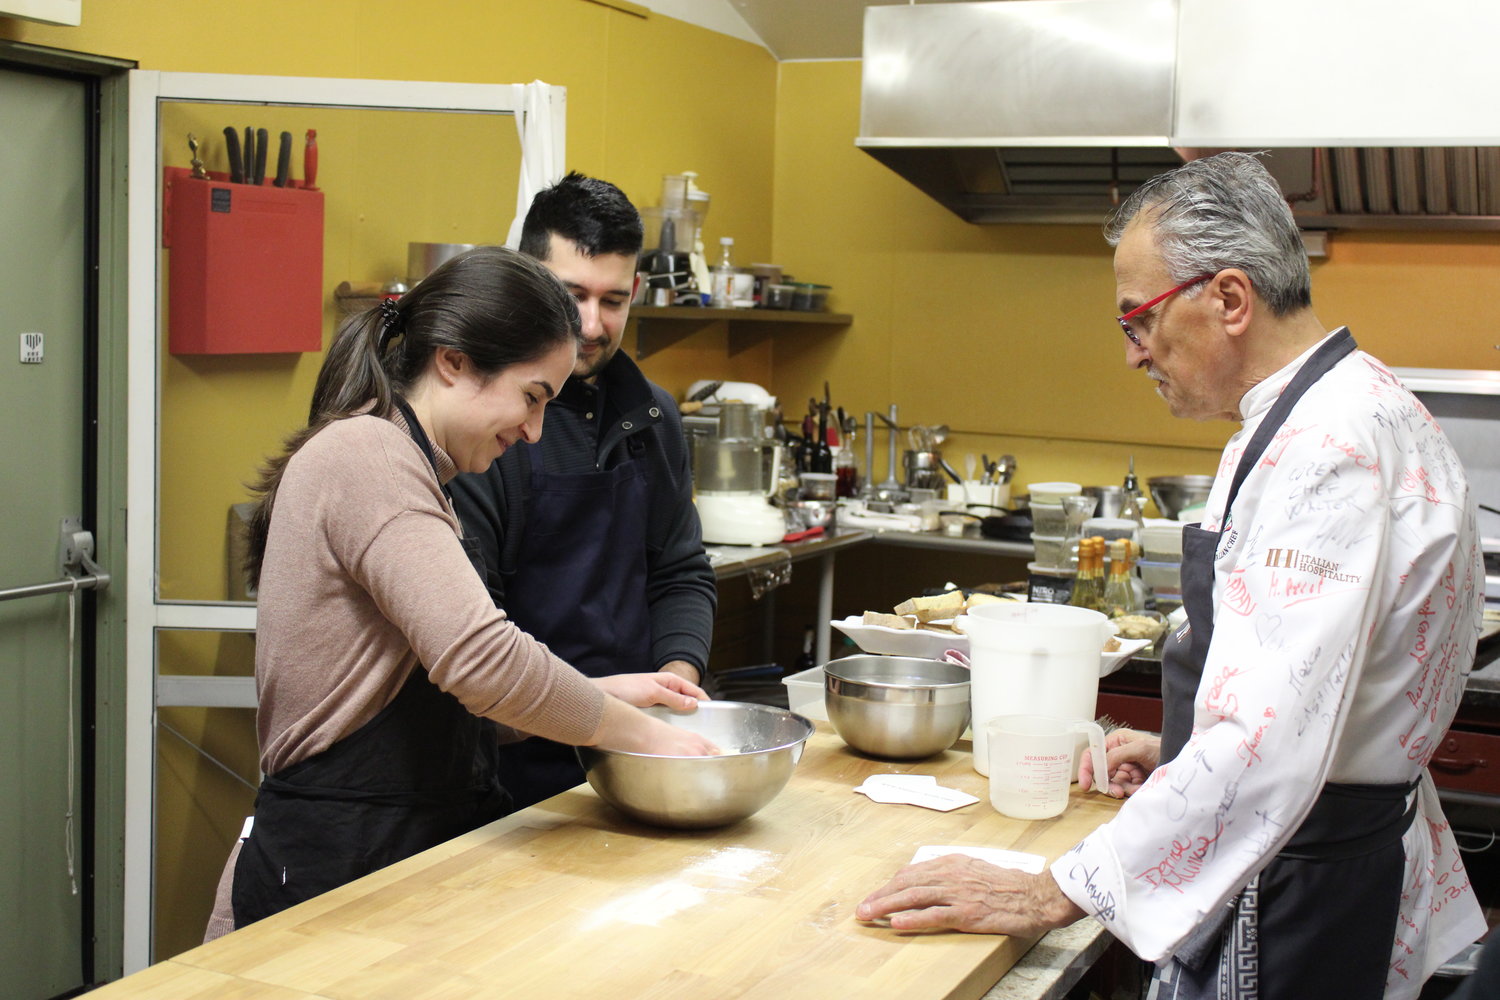 YOU CAN DOUGH IT: Maggie Simeone tries her hand at making fresh gnocchi with instruction from Chef Walter.